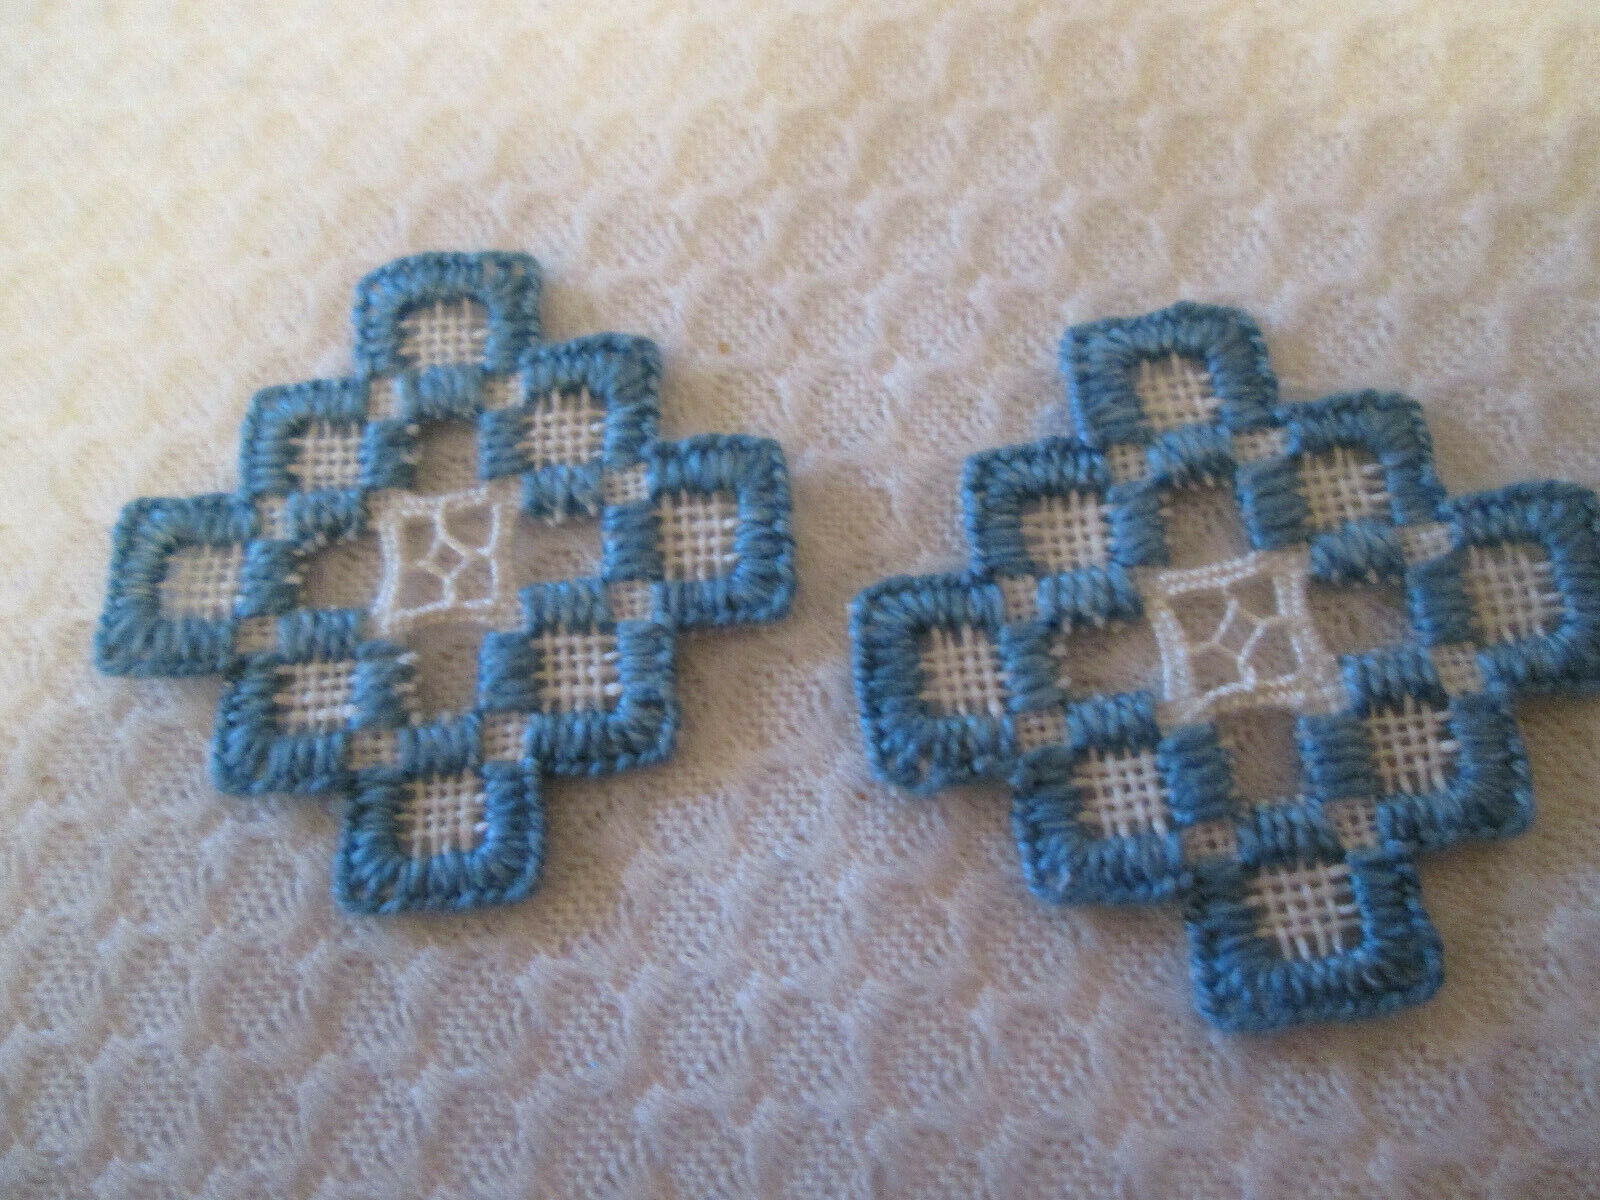 2 pcs Finally popular brand El Paso Mall Hardanger Doll House Norwegian Blue Doilies Embroidery W